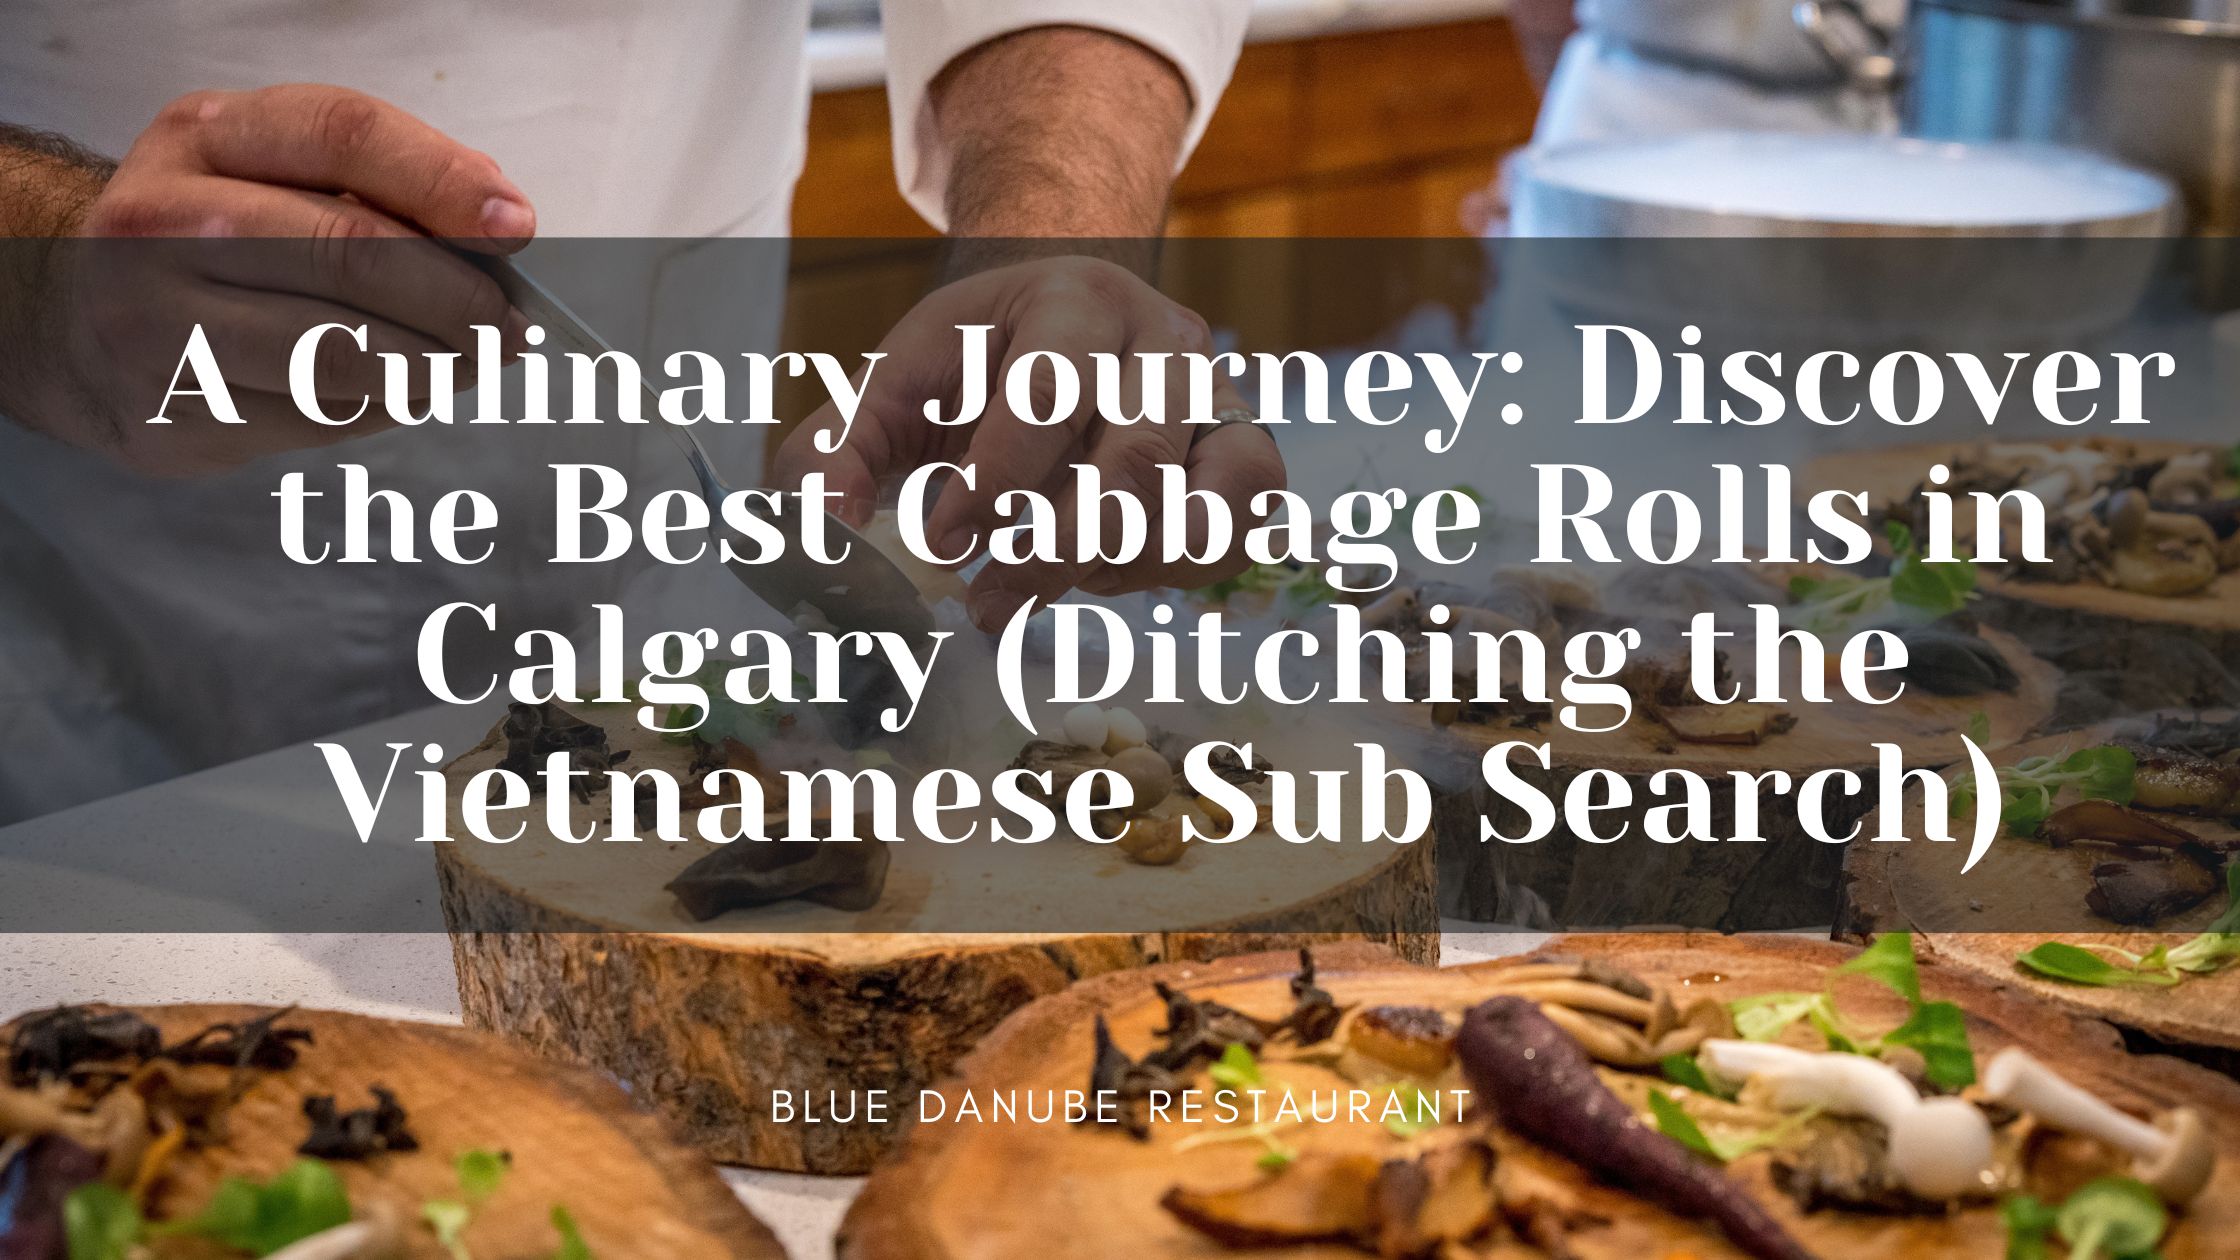 A Culinary Journey: Discover the Best Cabbage Rolls in Calgary (Ditching the Vietnamese Sub Search)